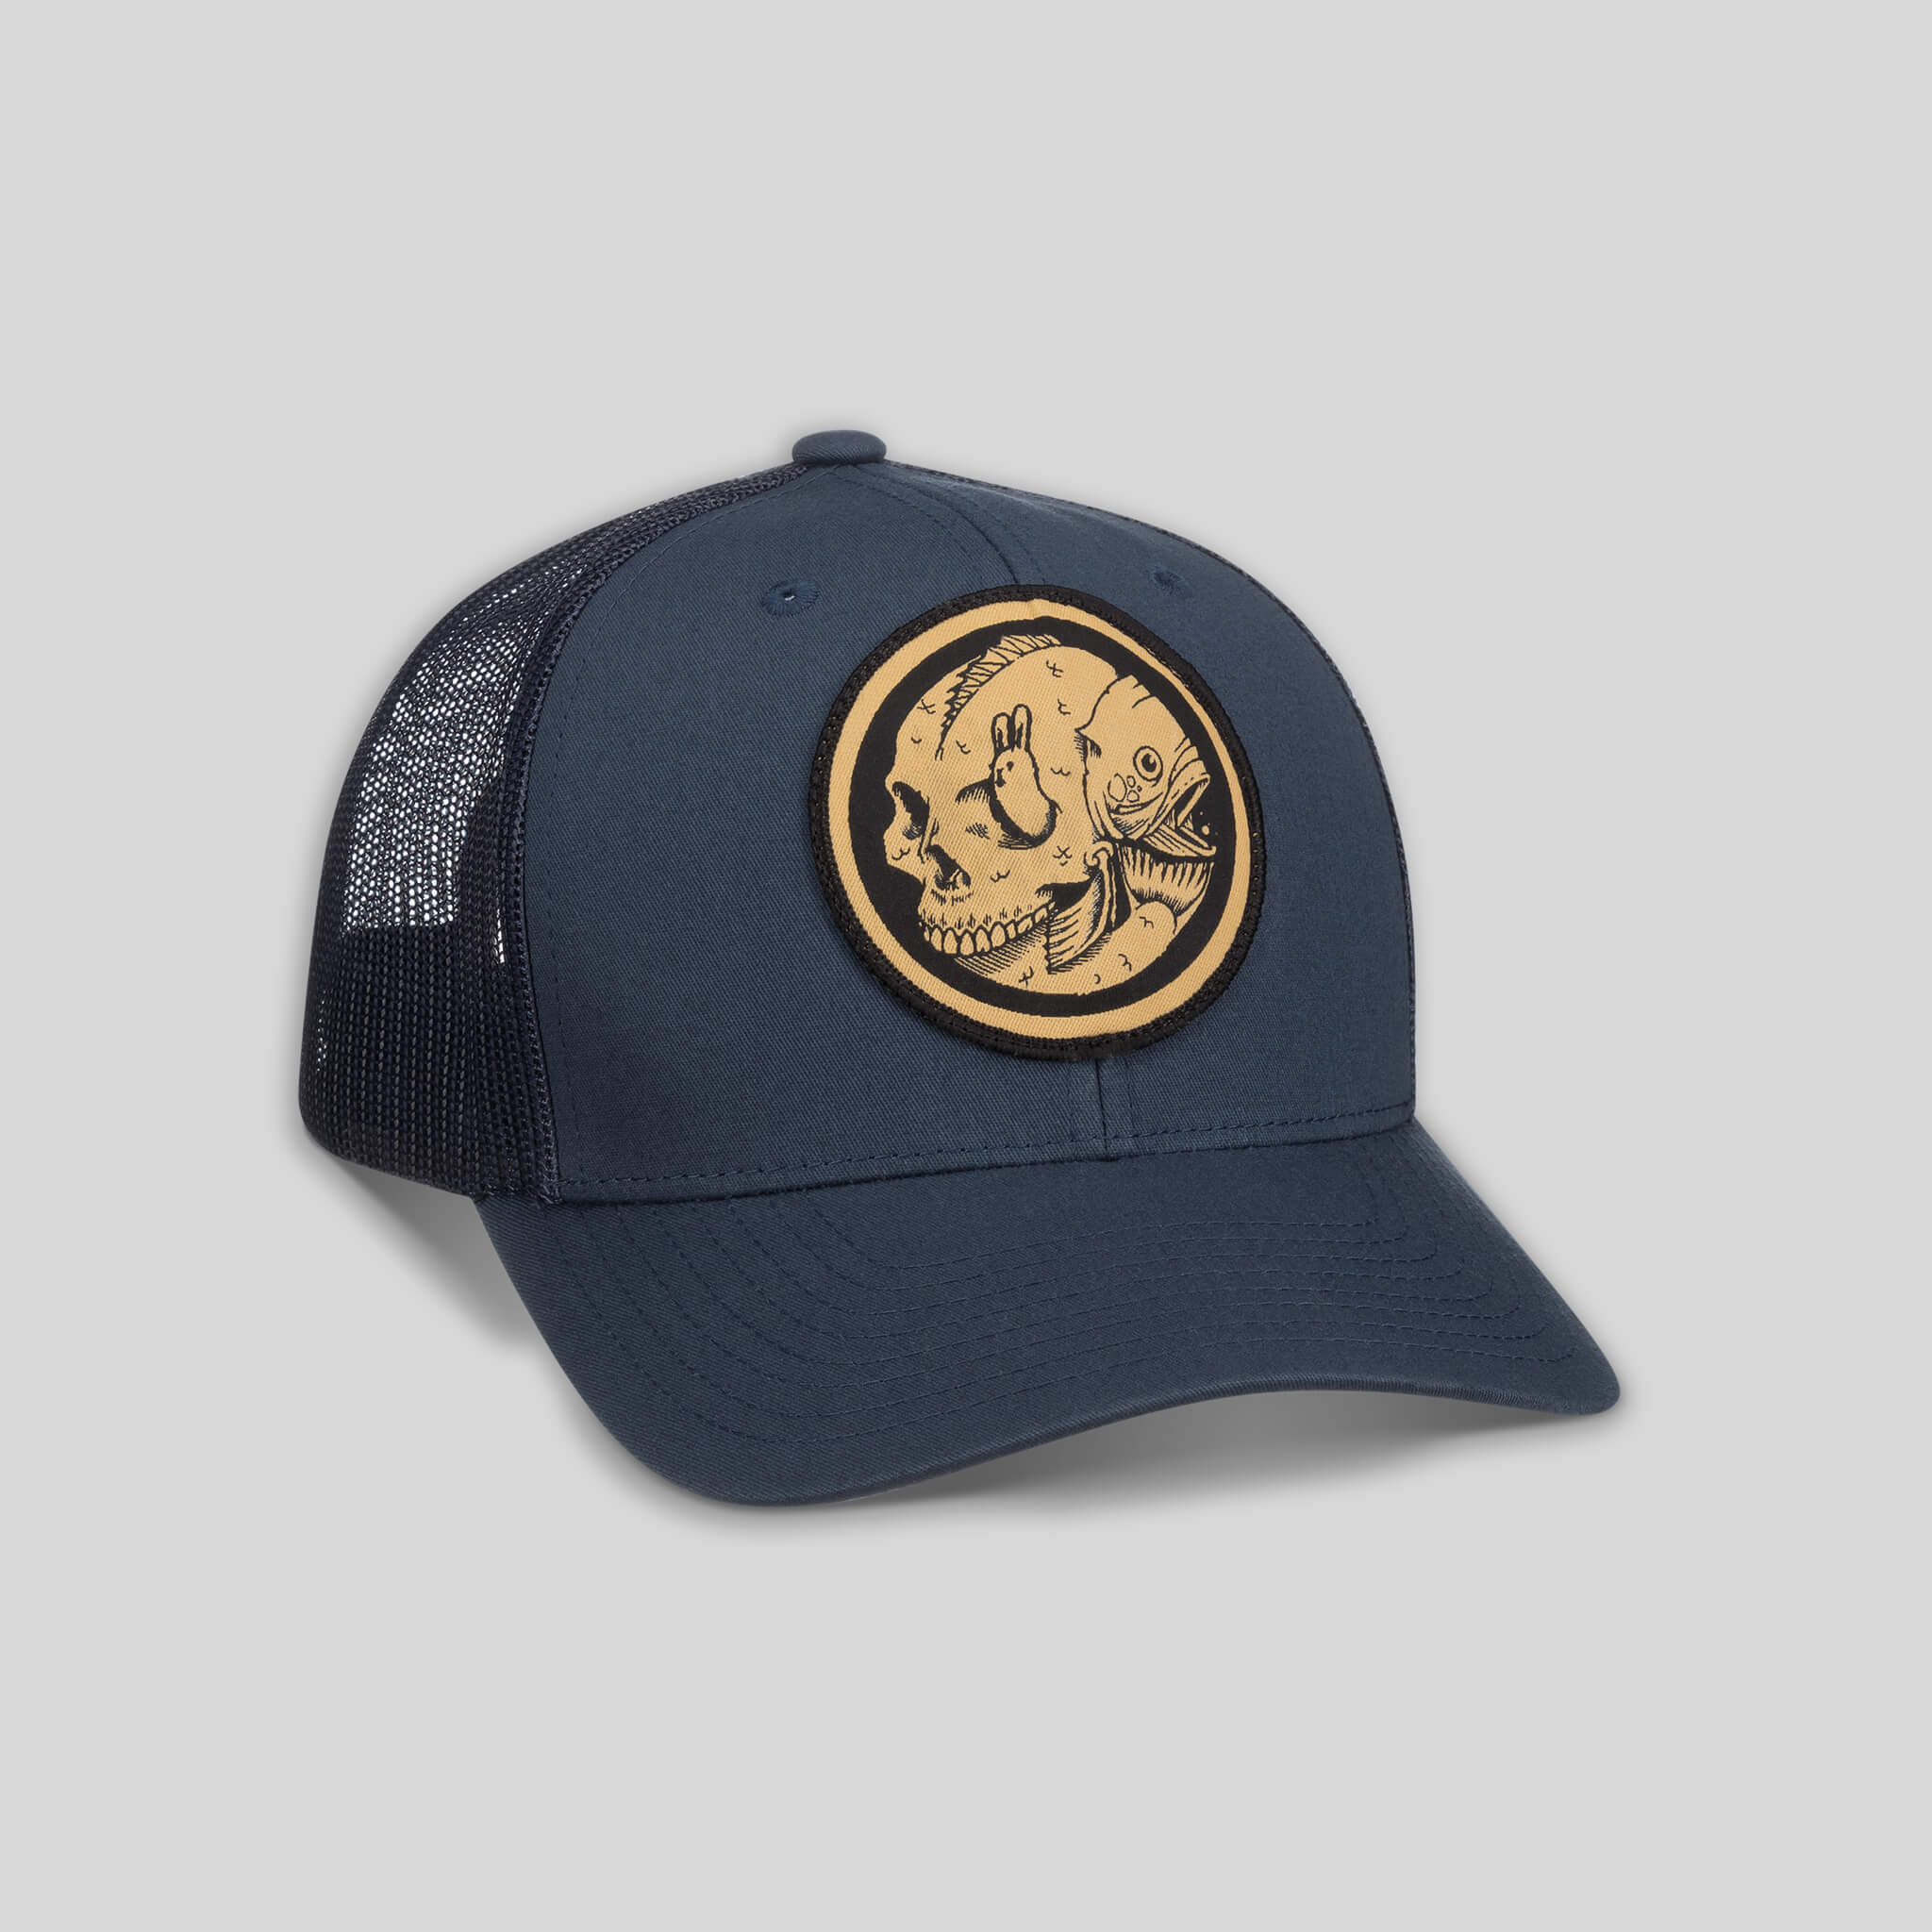 Fish Factory Two Tone Trucker Hat by Jeremy Fish